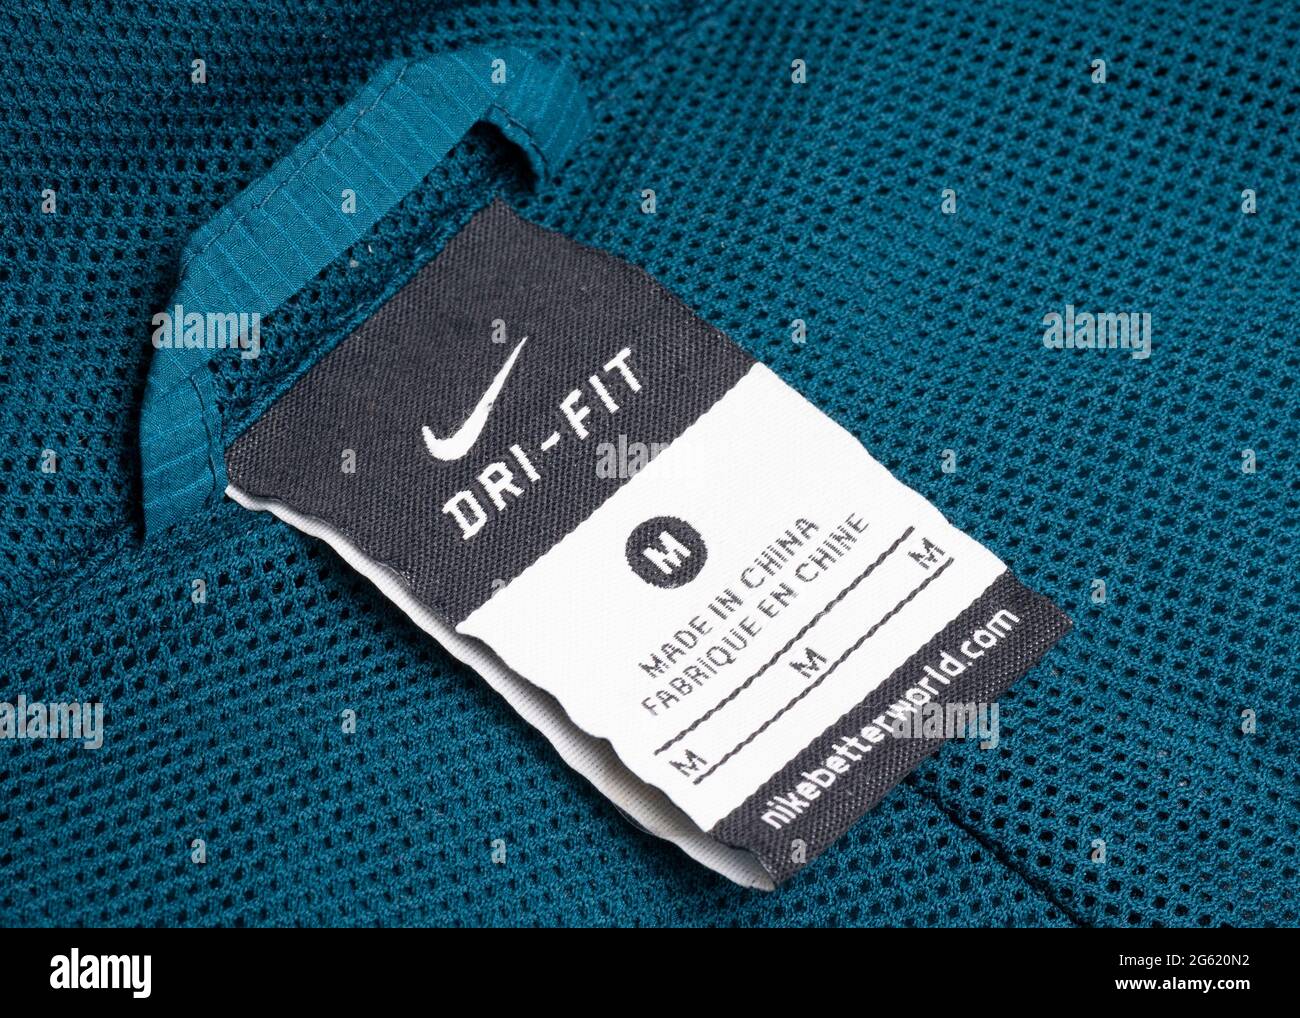 Made in China label on Nike Dry Fit sports garment Stock Photo - Alamy